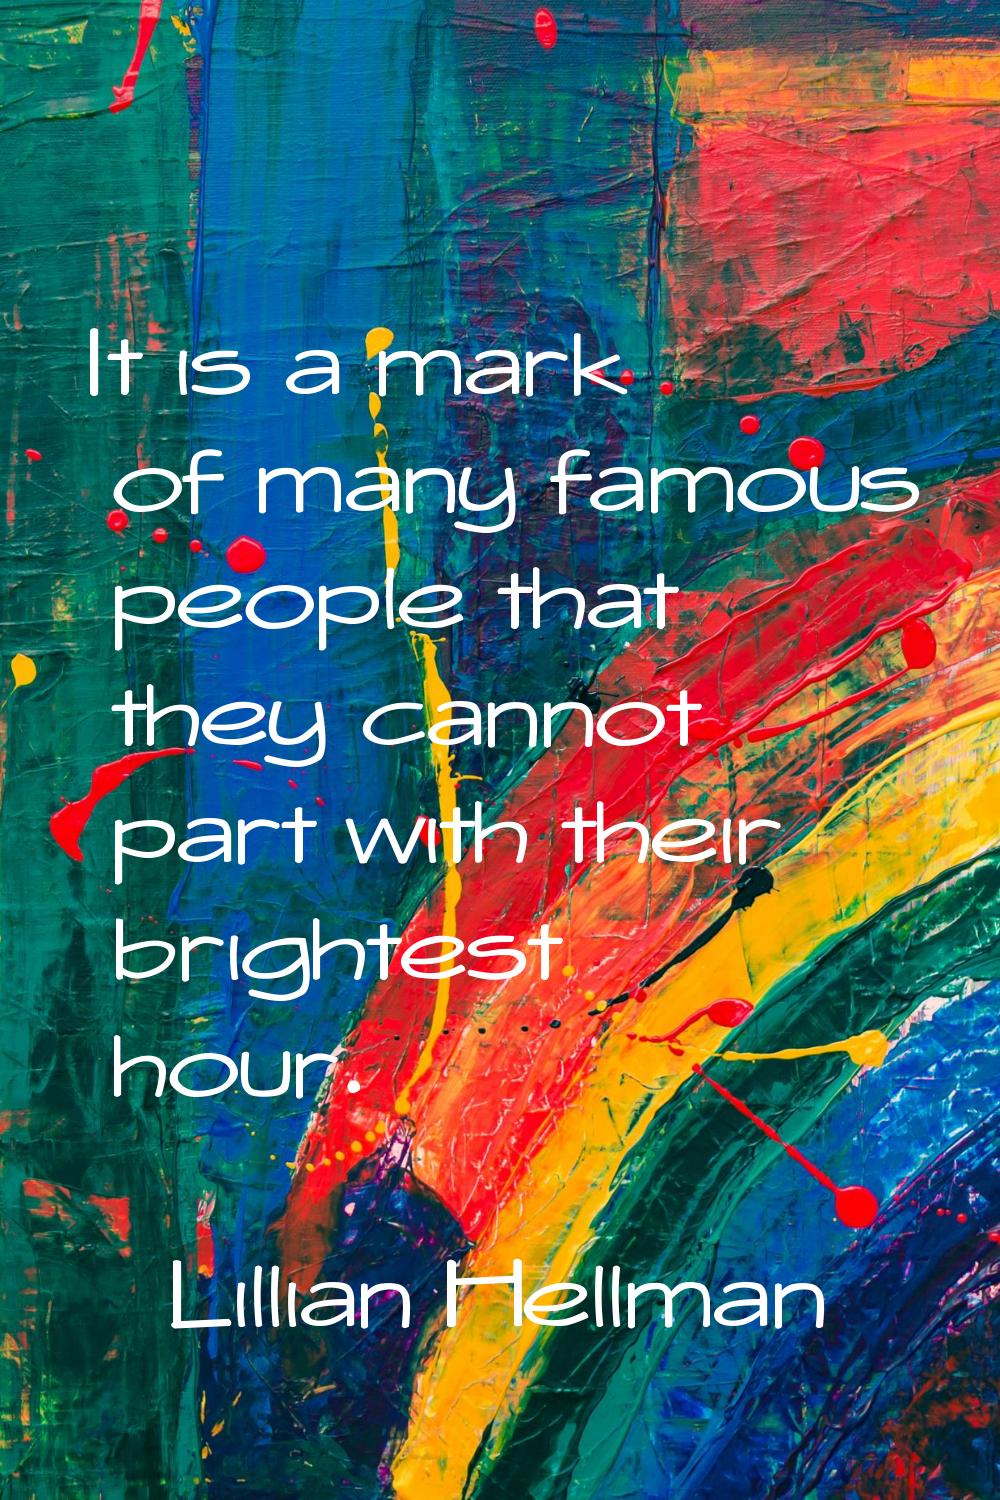 It is a mark of many famous people that they cannot part with their brightest hour.